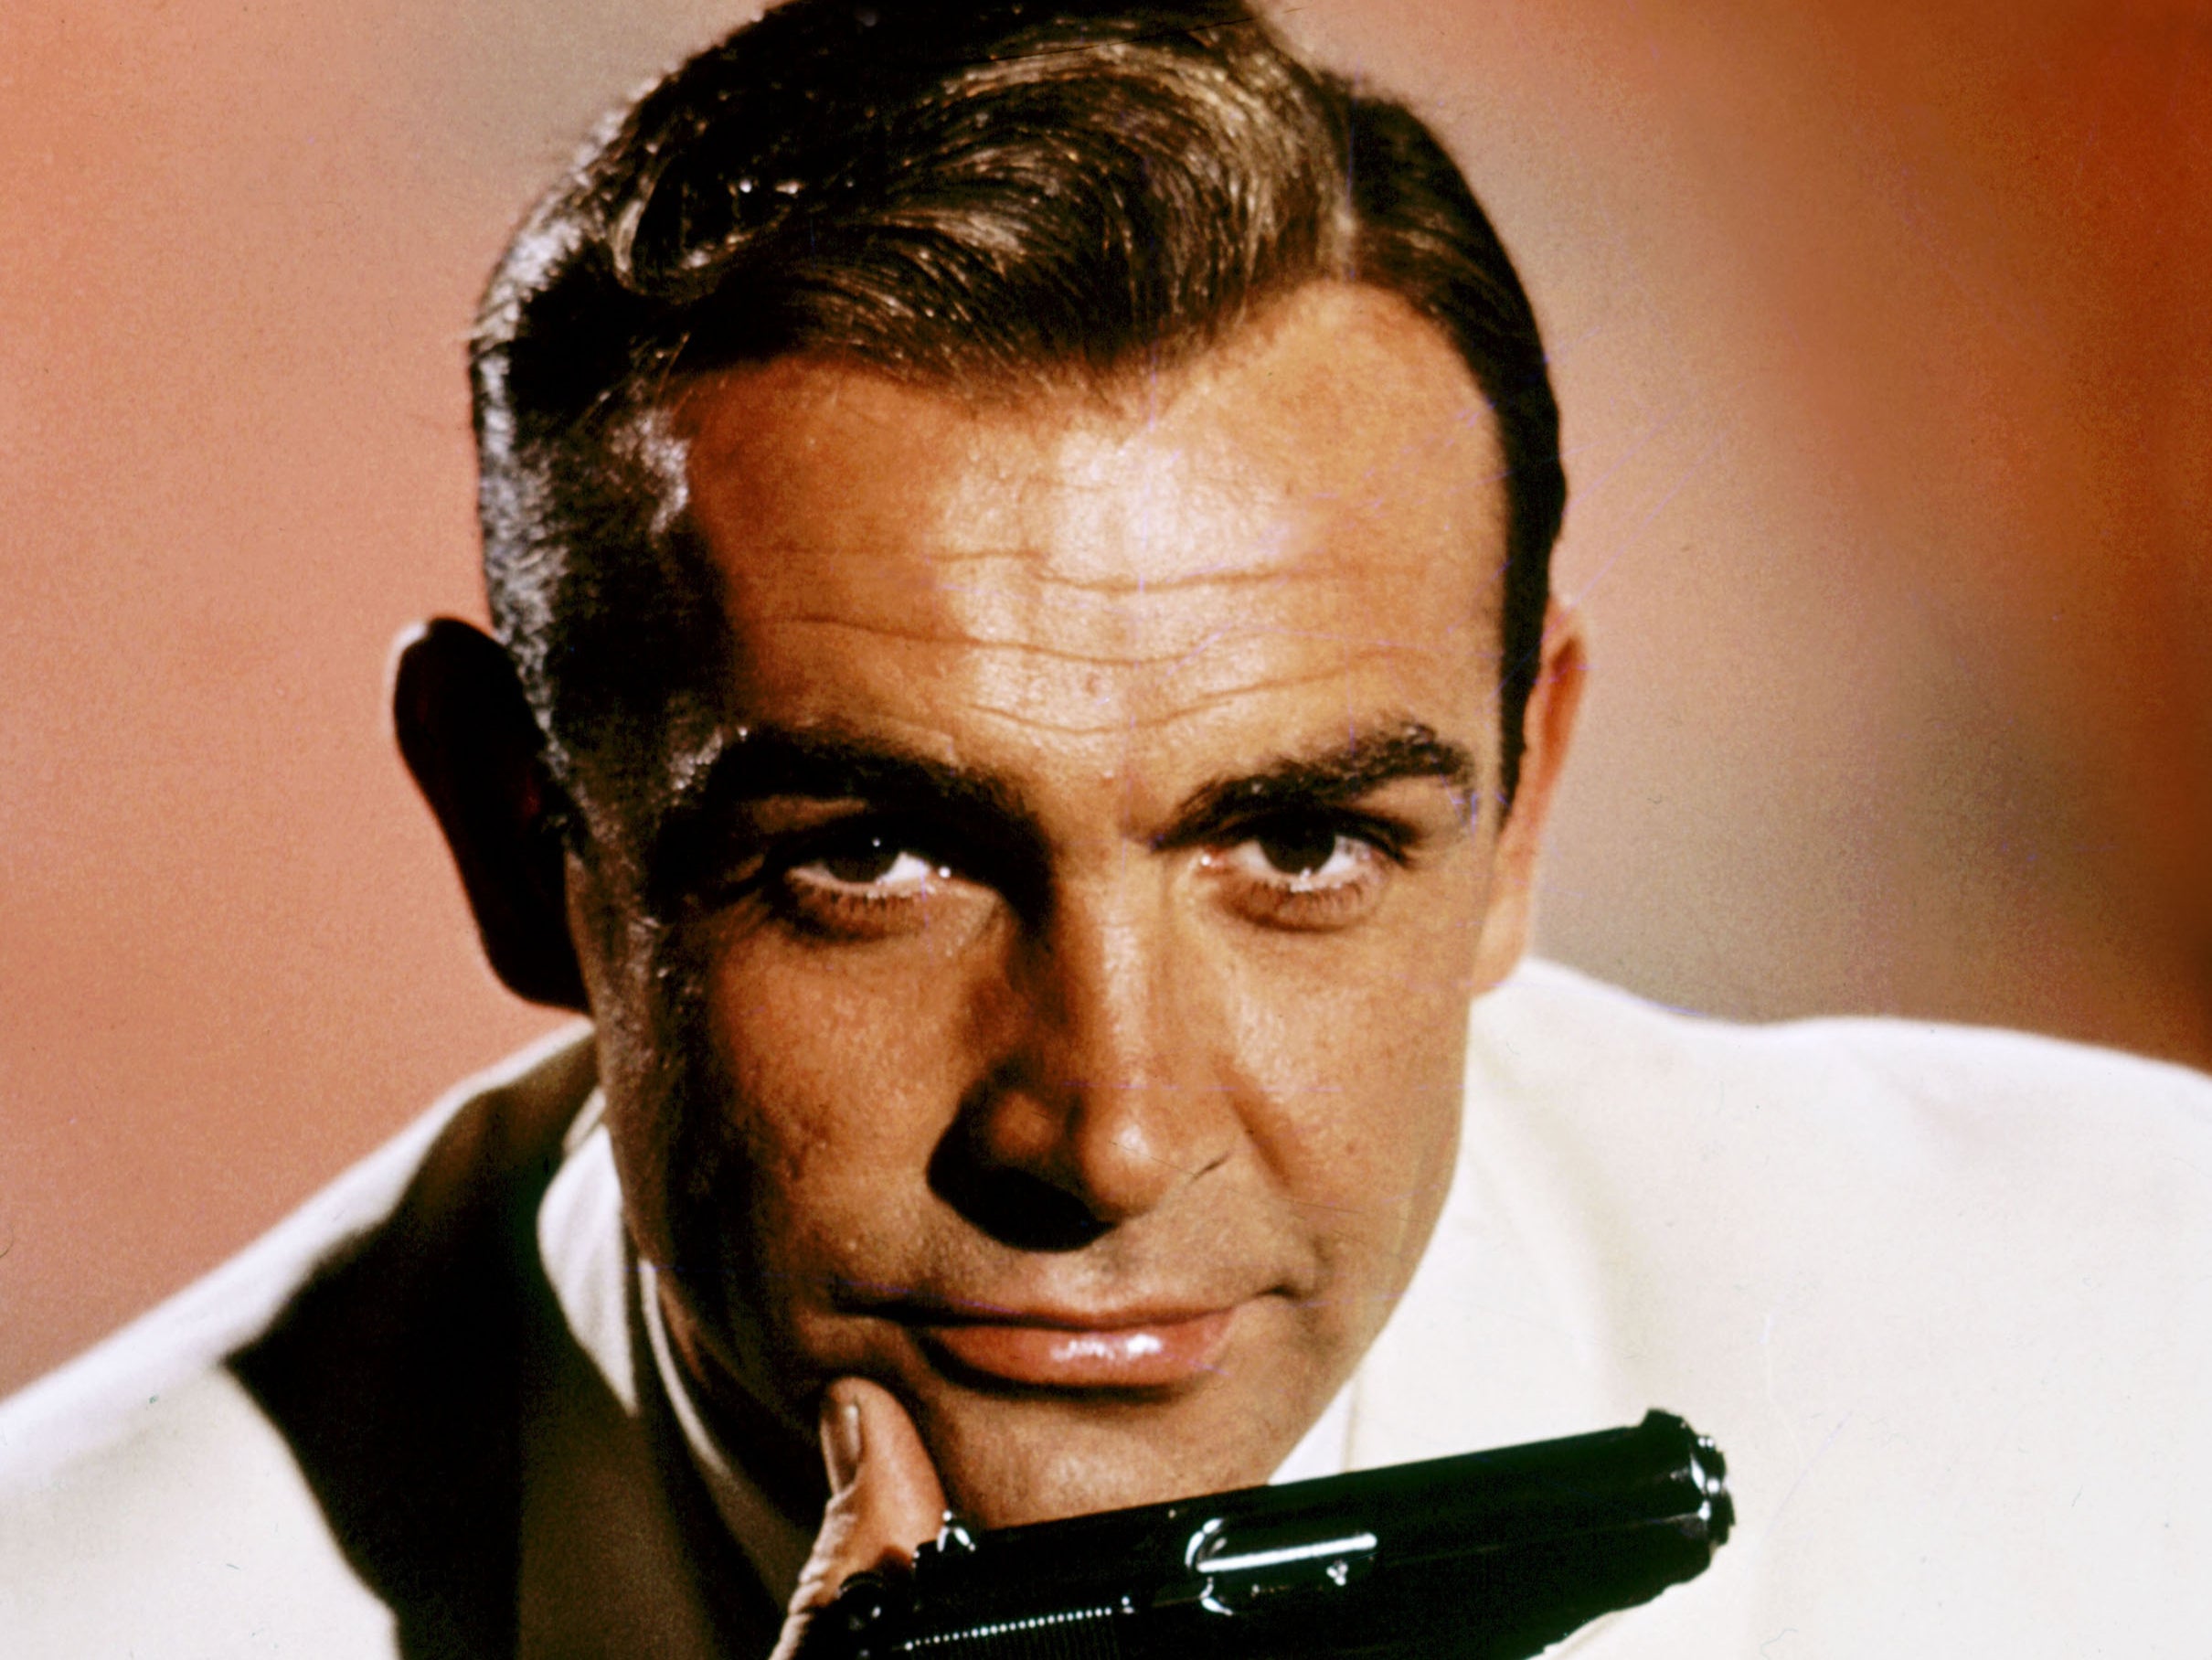 James Bond At 60 Why Sean Connery Would Be Rehired If He Walked Back In Through The Door The